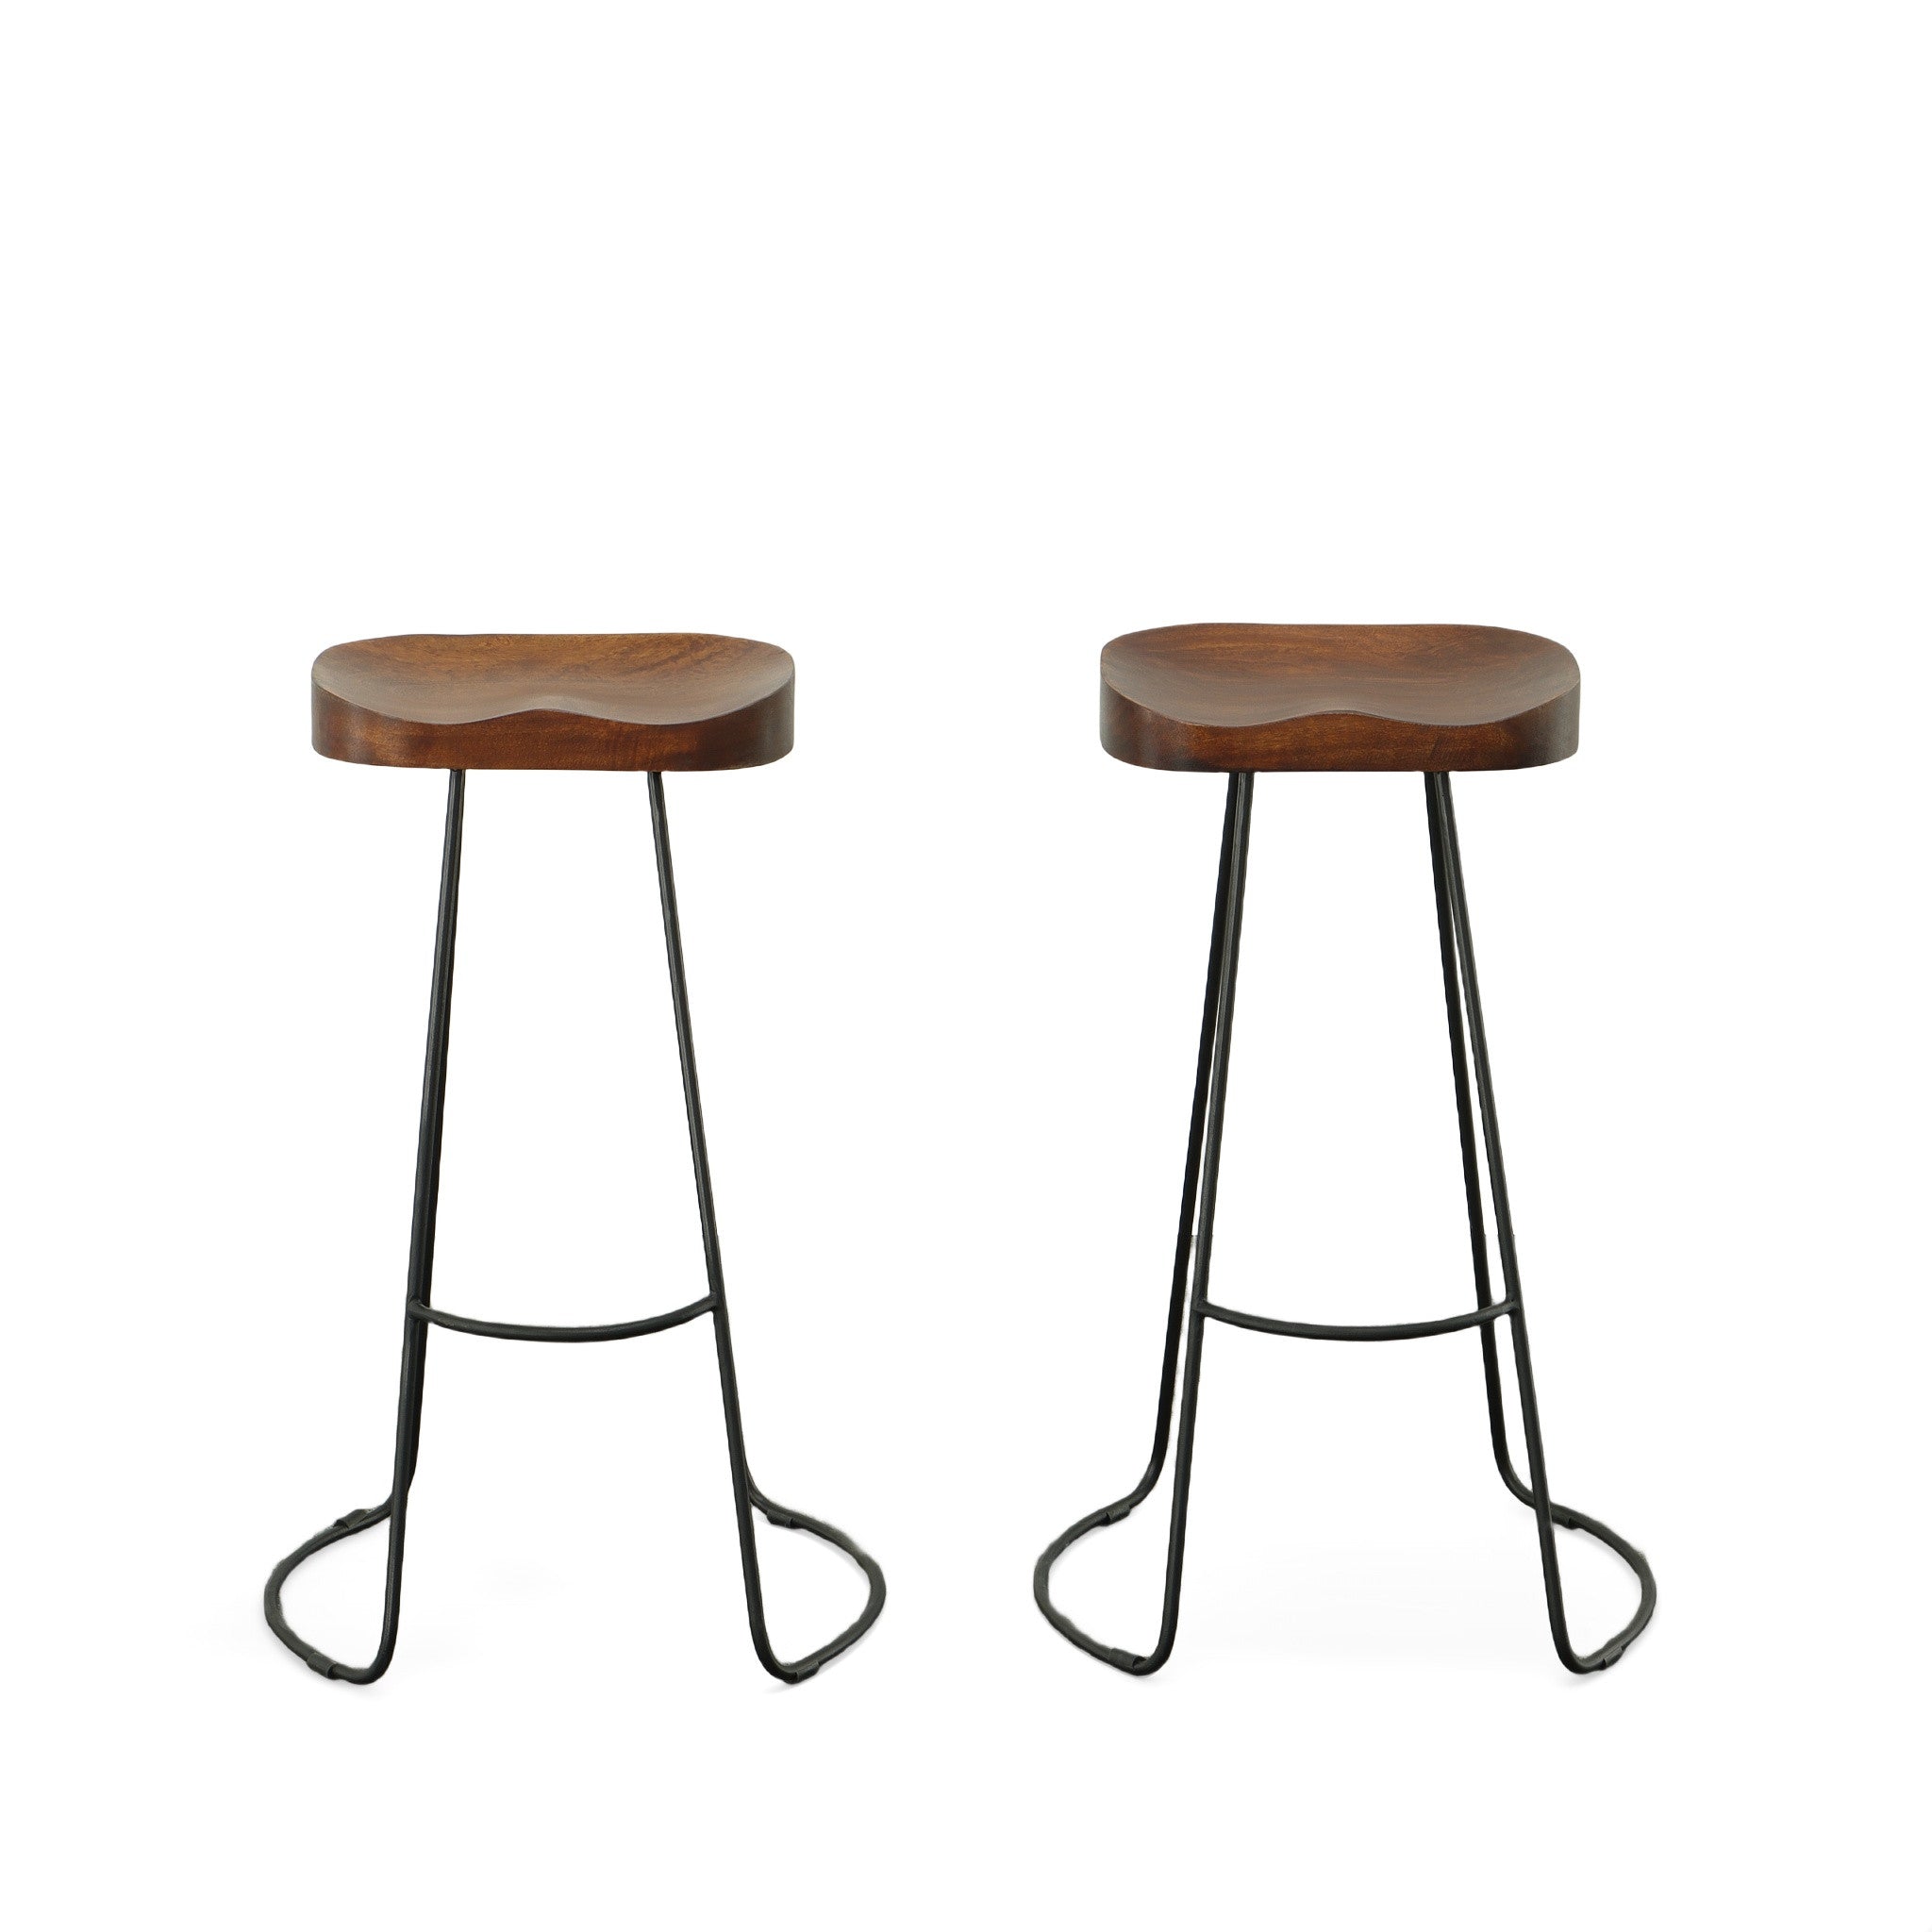 Set of Two 31" Chestnut And Black Steel Backless Bar Height Bar Chairs